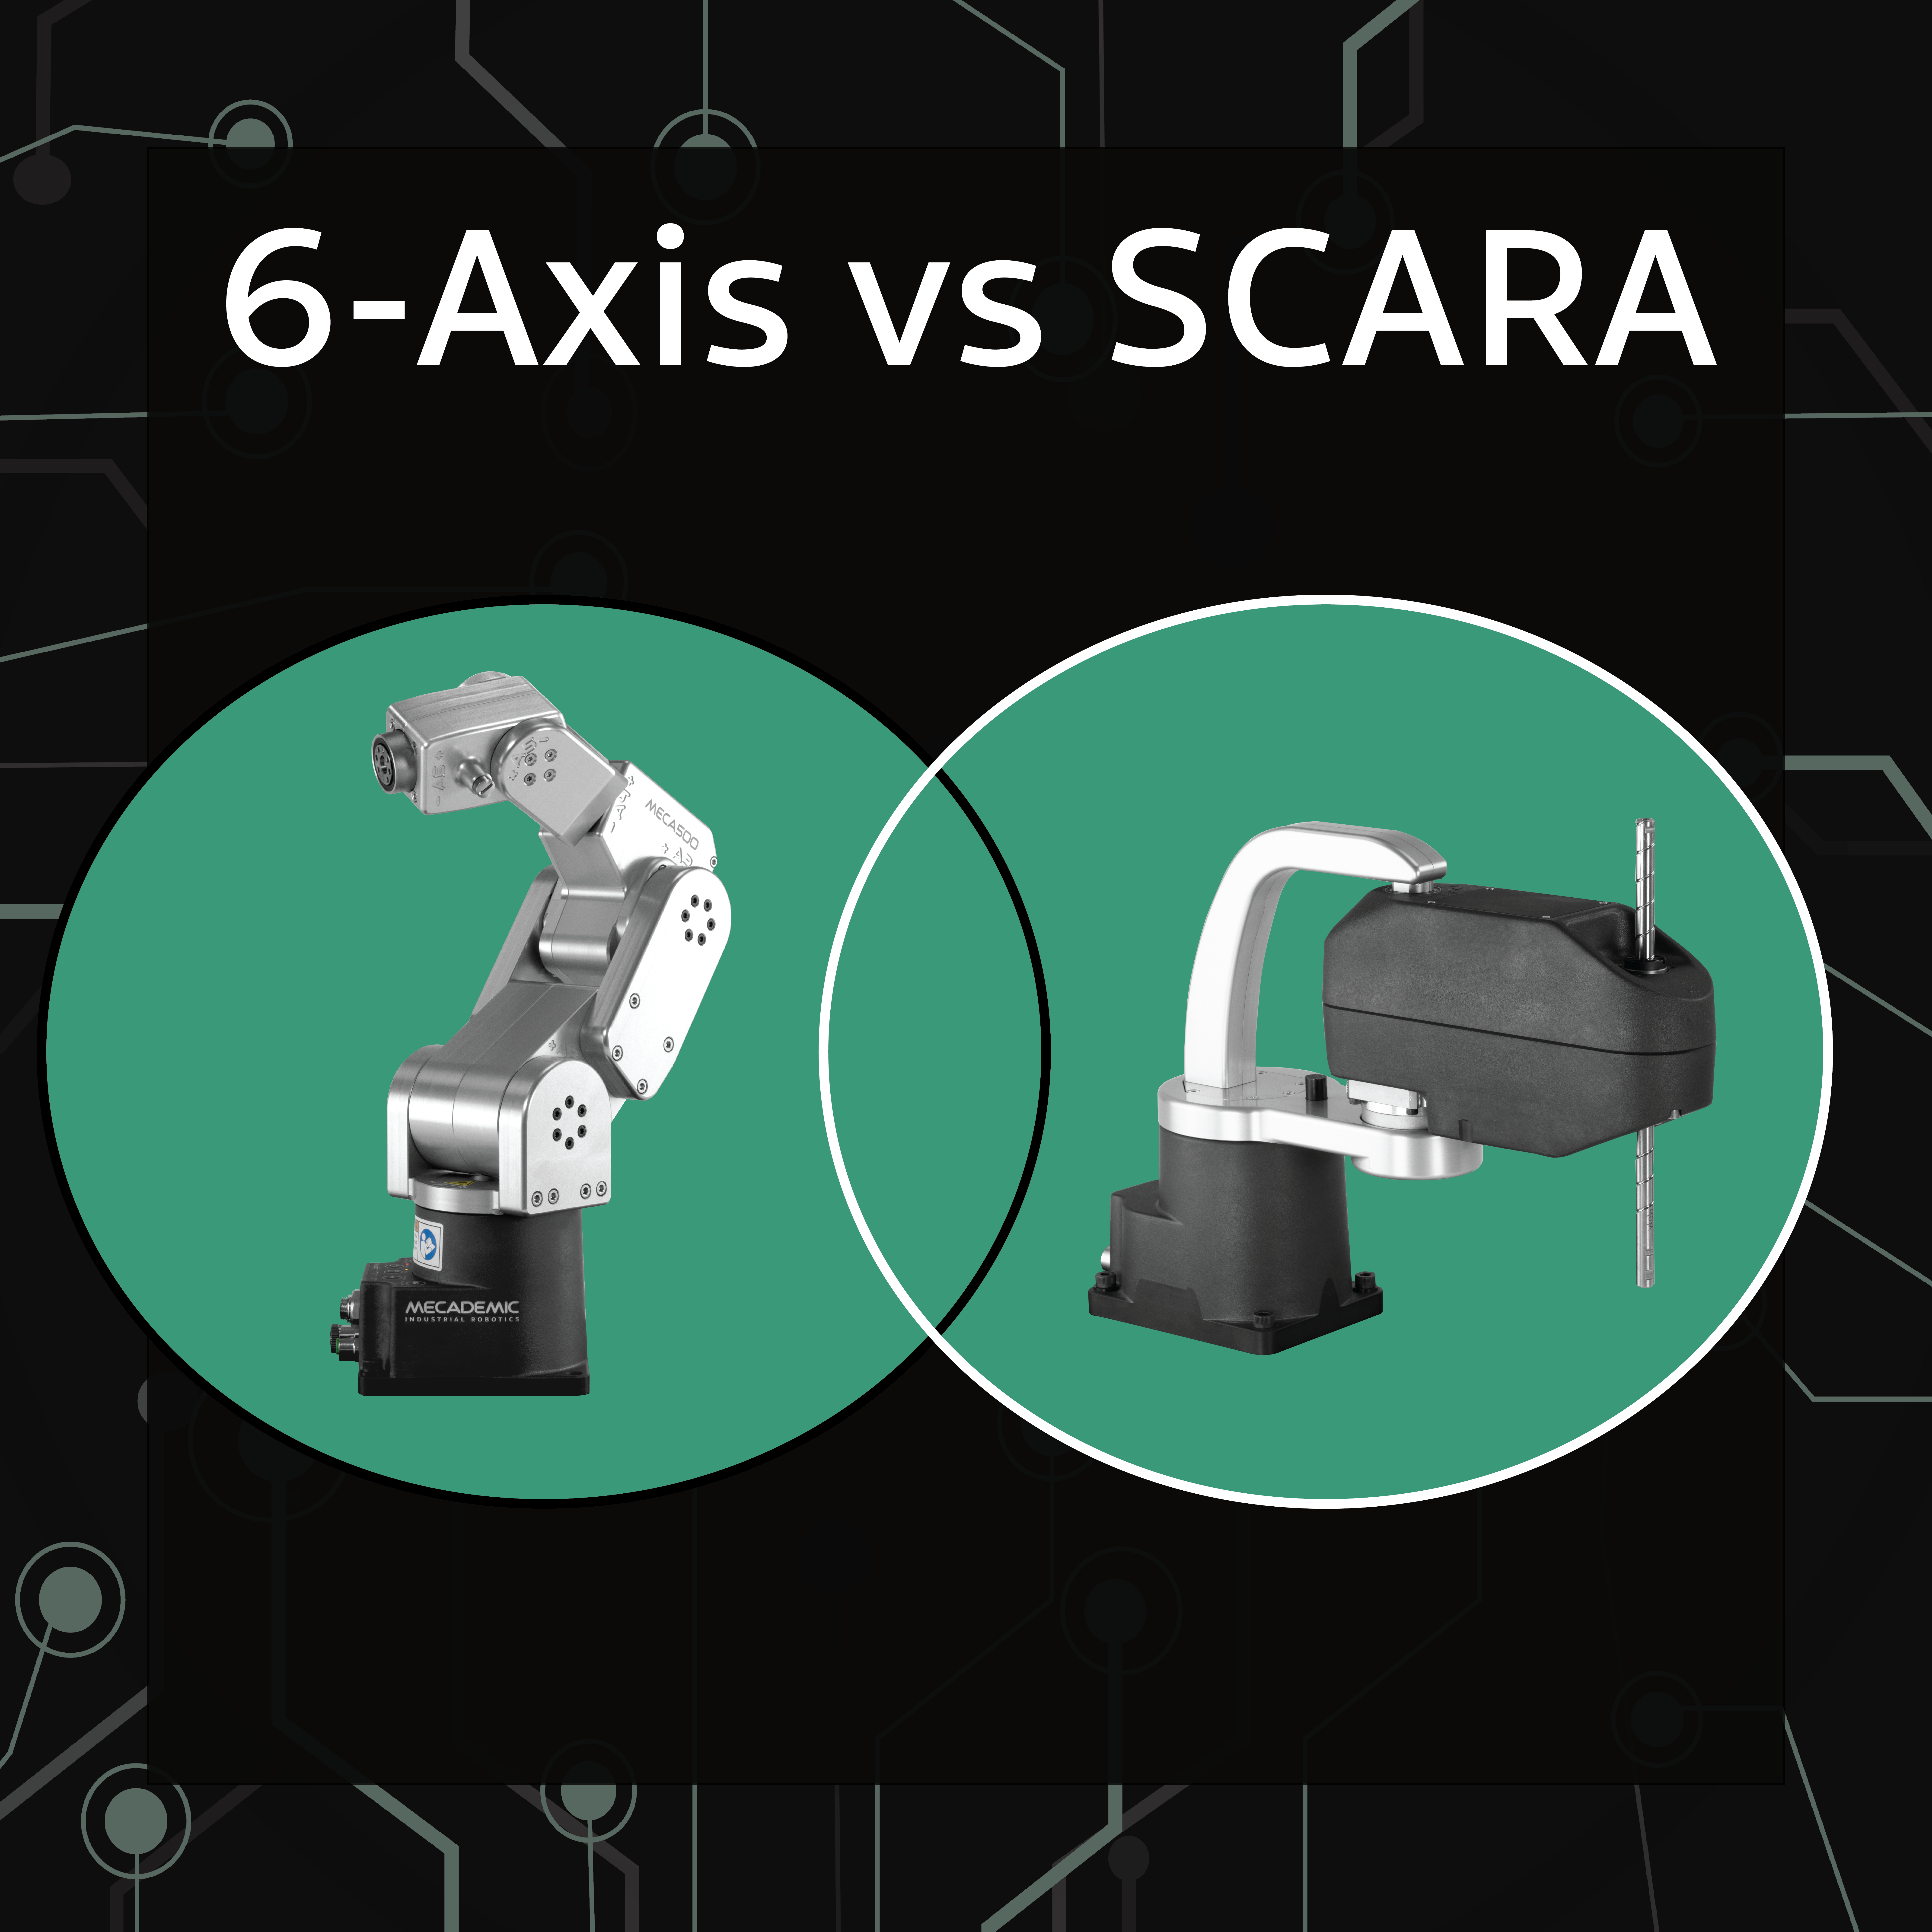 6-Axis or SCARA? A Complete Guide to Choosing the Right Robot for Your Business’ Needs